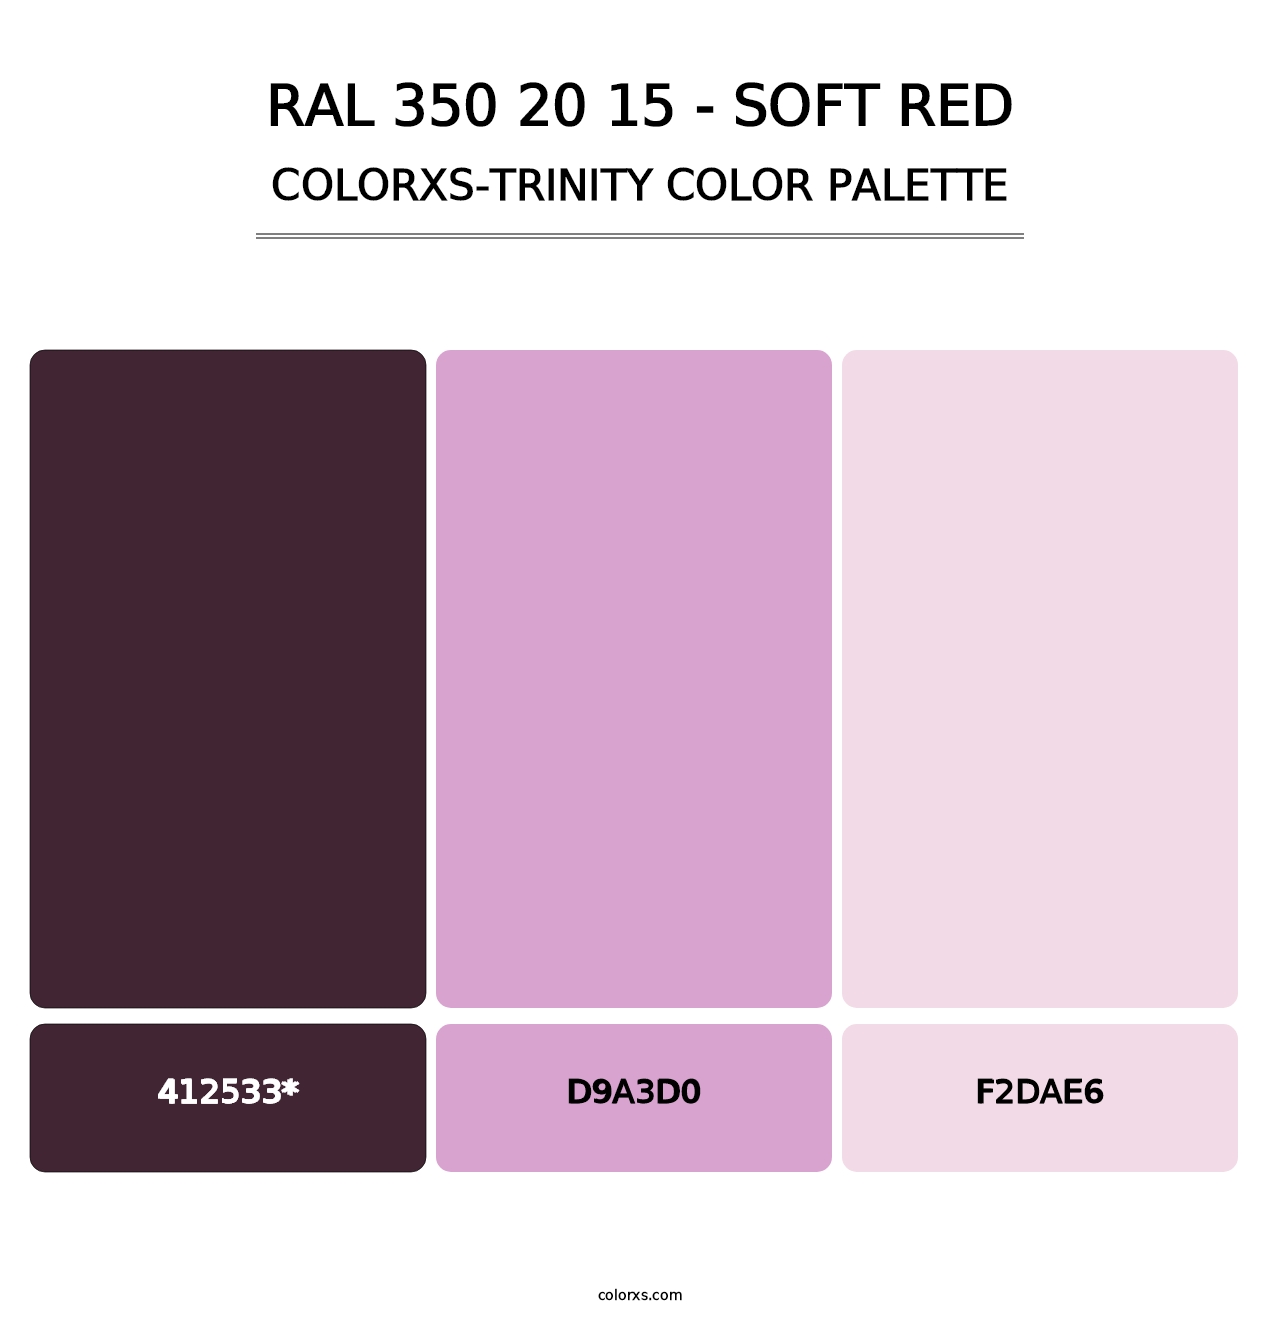 RAL 350 20 15 - Soft Red - Colorxs Trinity Palette